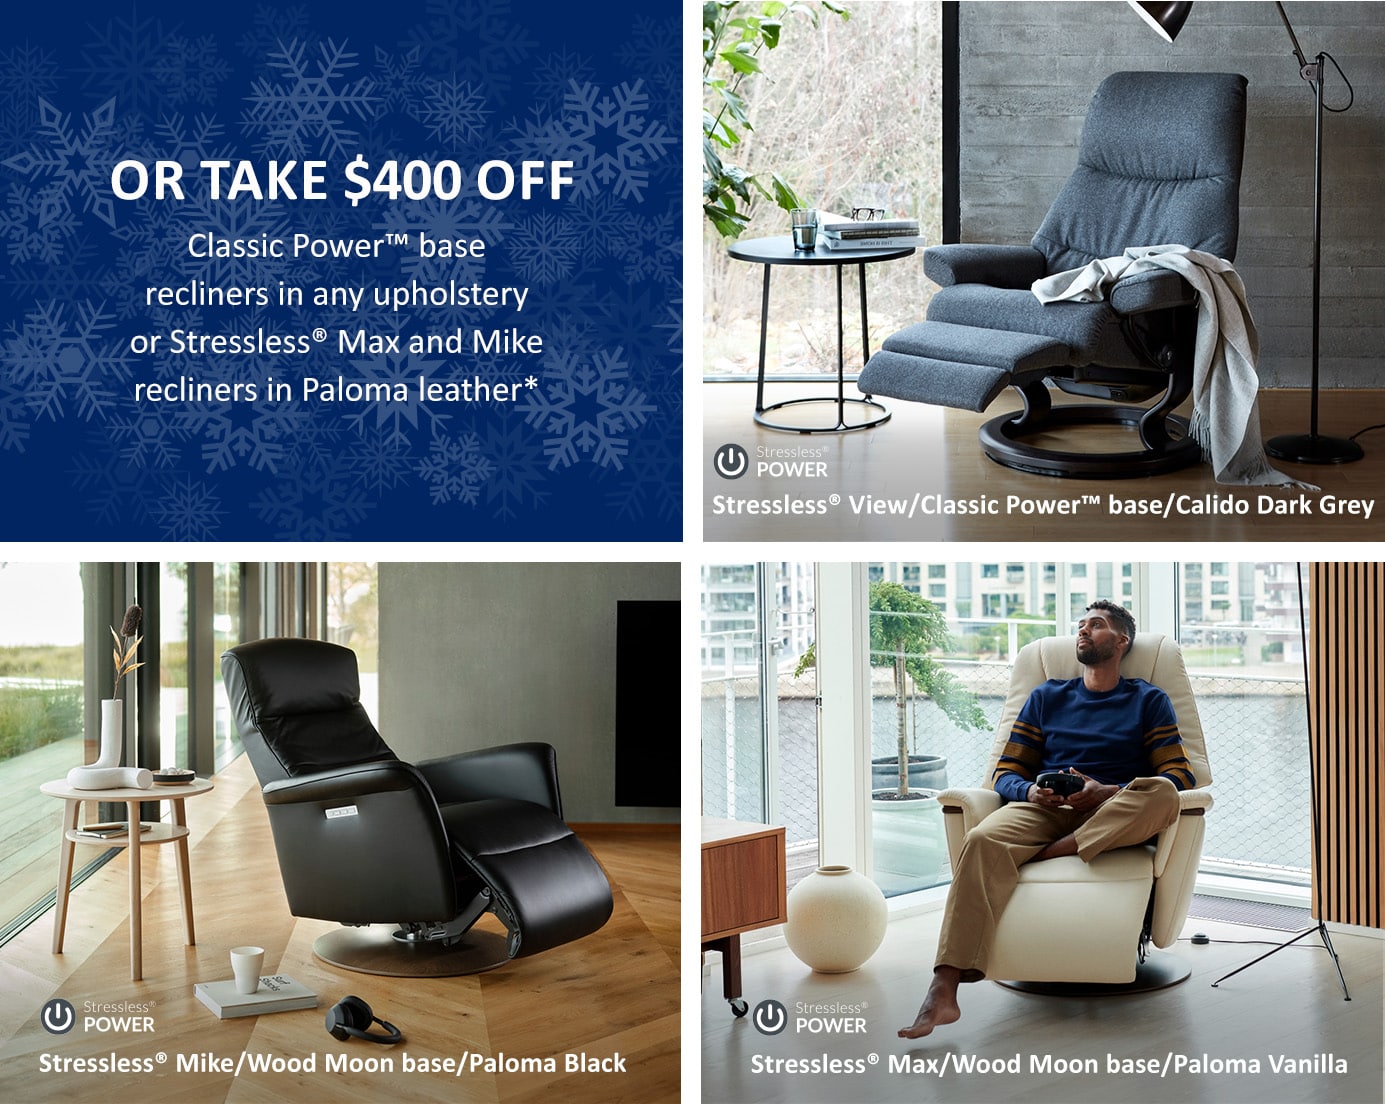 Stressless® Promo: Get $400 OFF on select power recliners